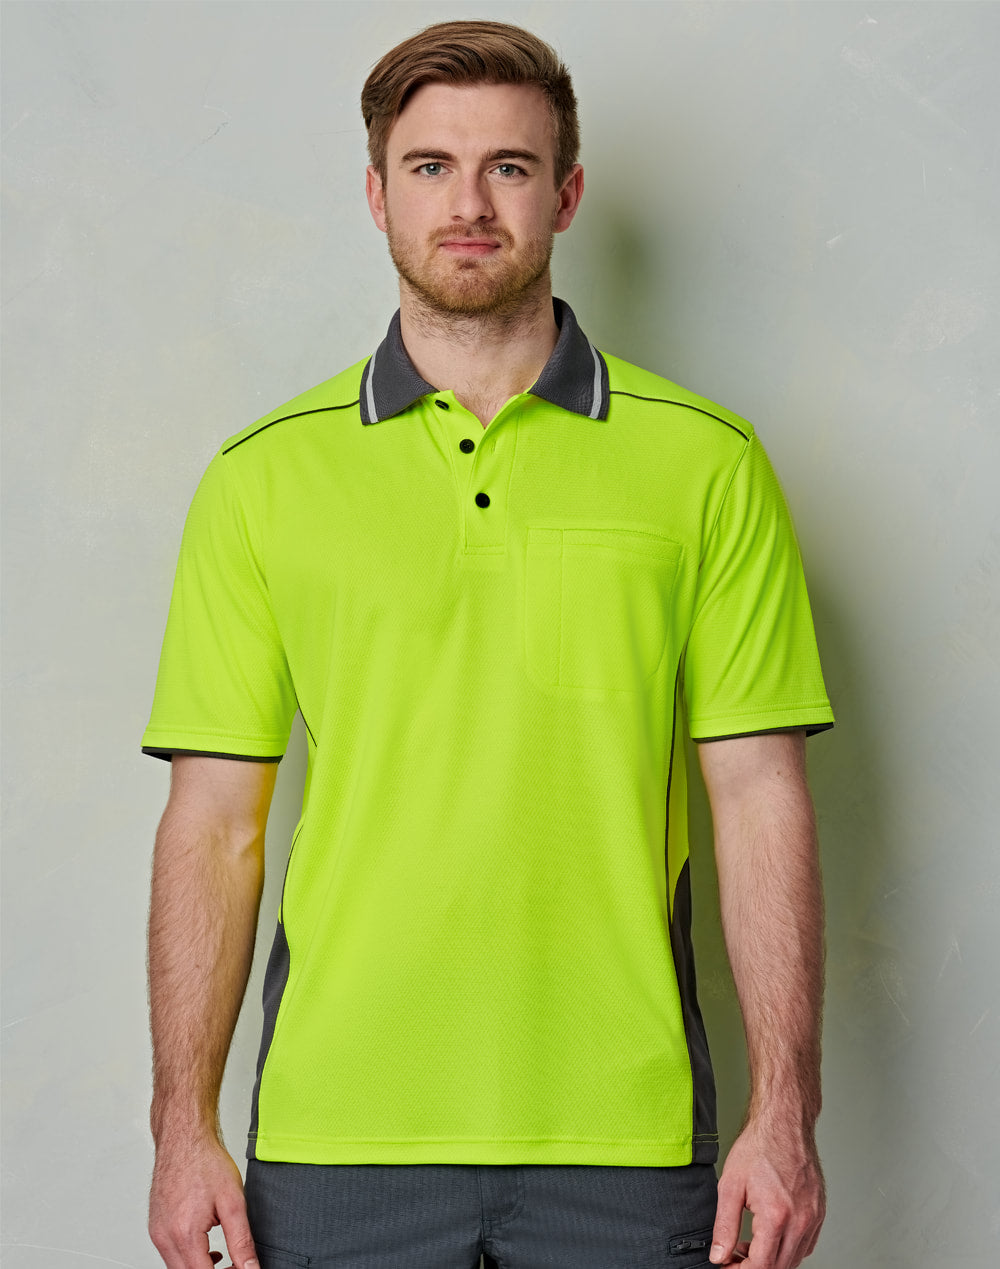 AIW SW79 UNISEX HI-VIS BAMBOO CHARCOAL VENTED SS POLO